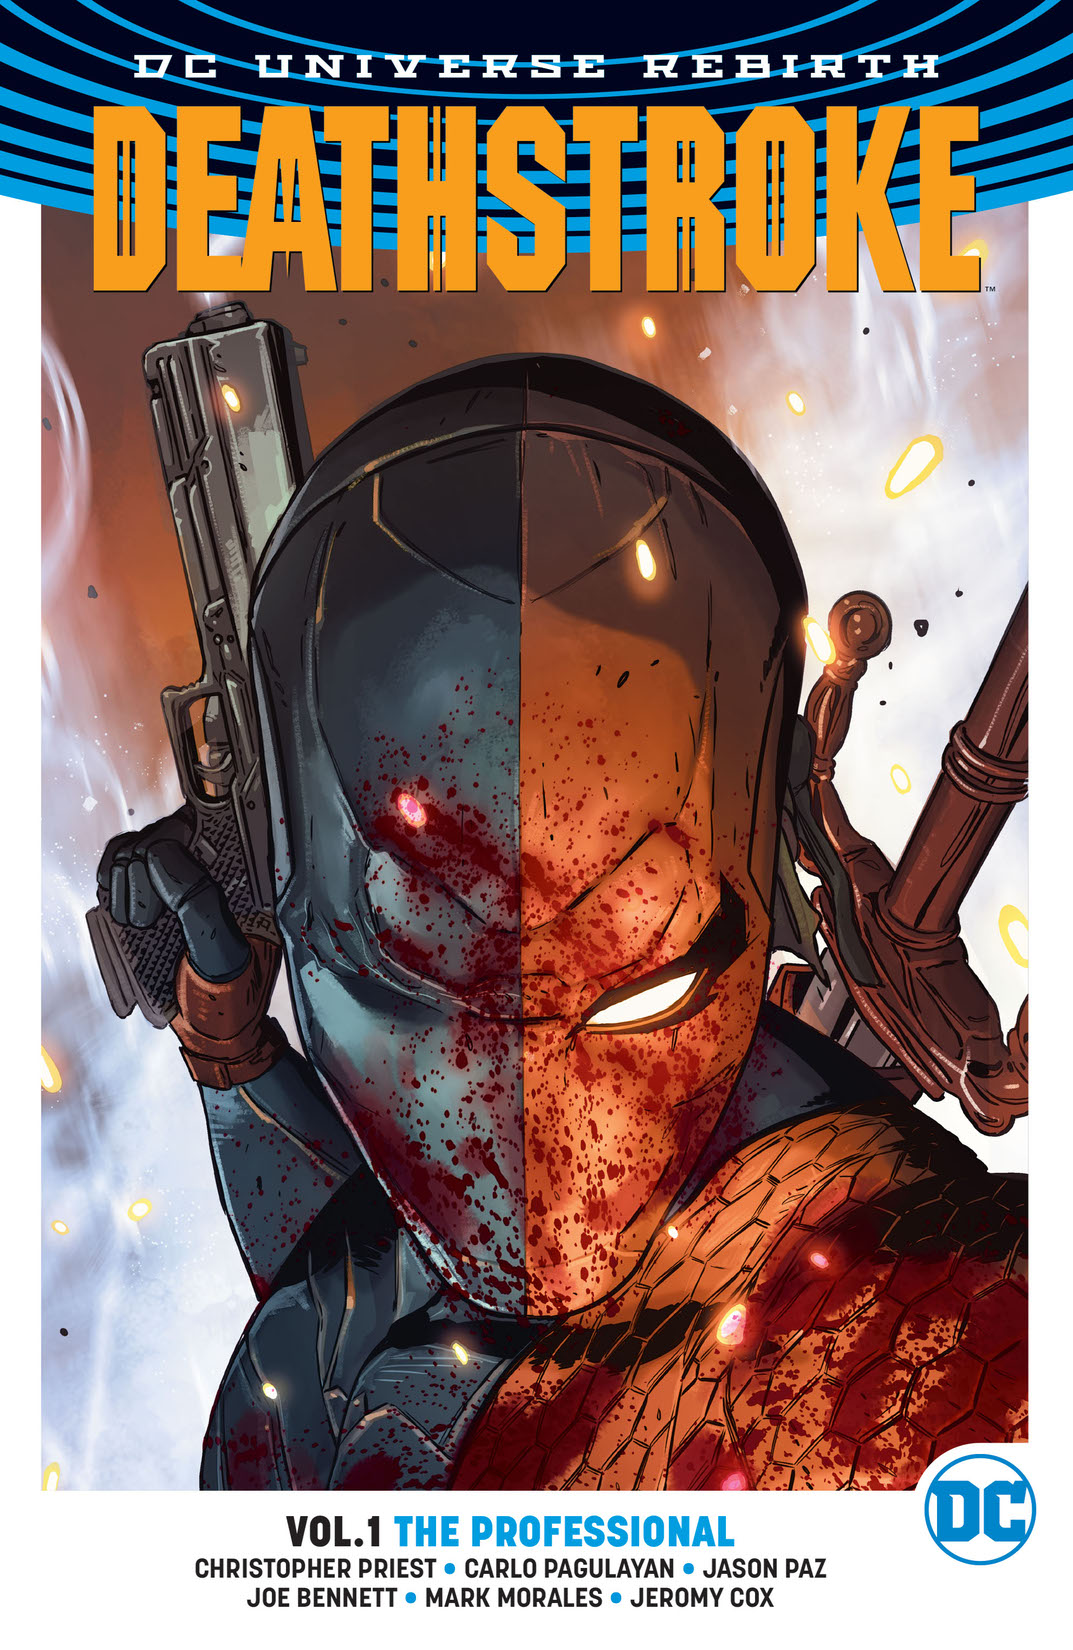 Deathstroke Vol. 1: The Professional preview images